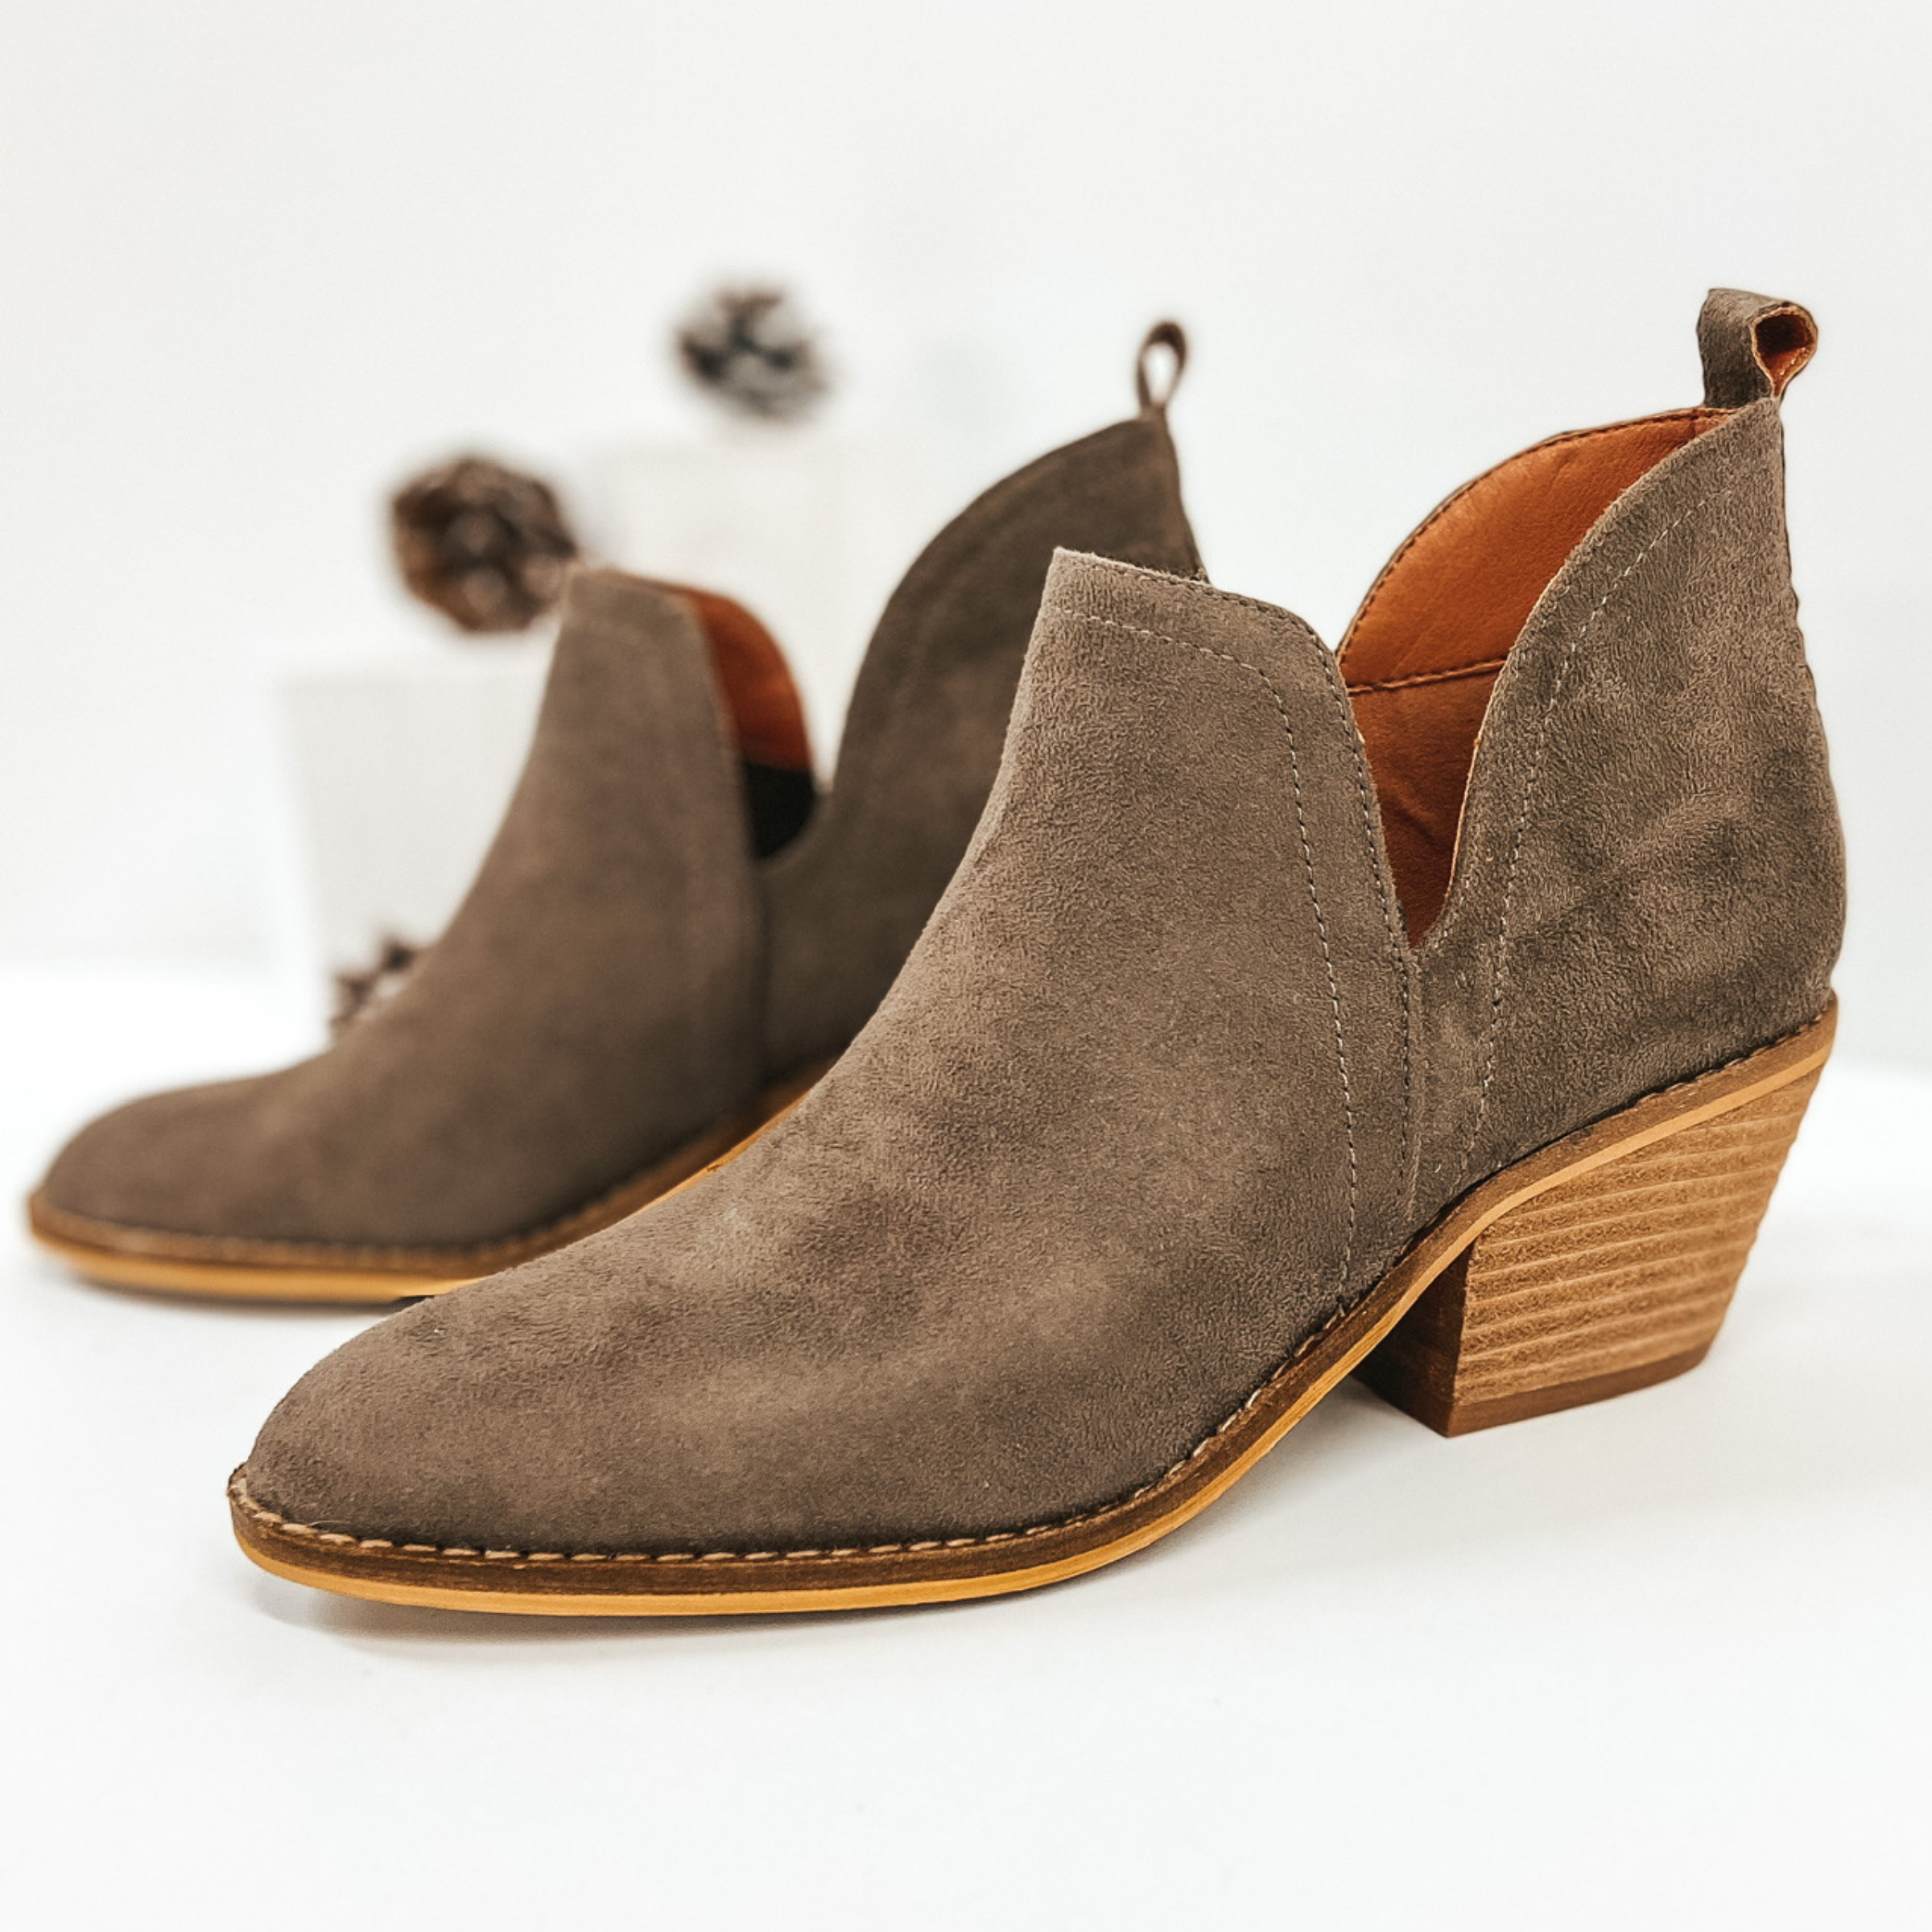 Taupe Suede booties with ankle slits. Pictured on white background.